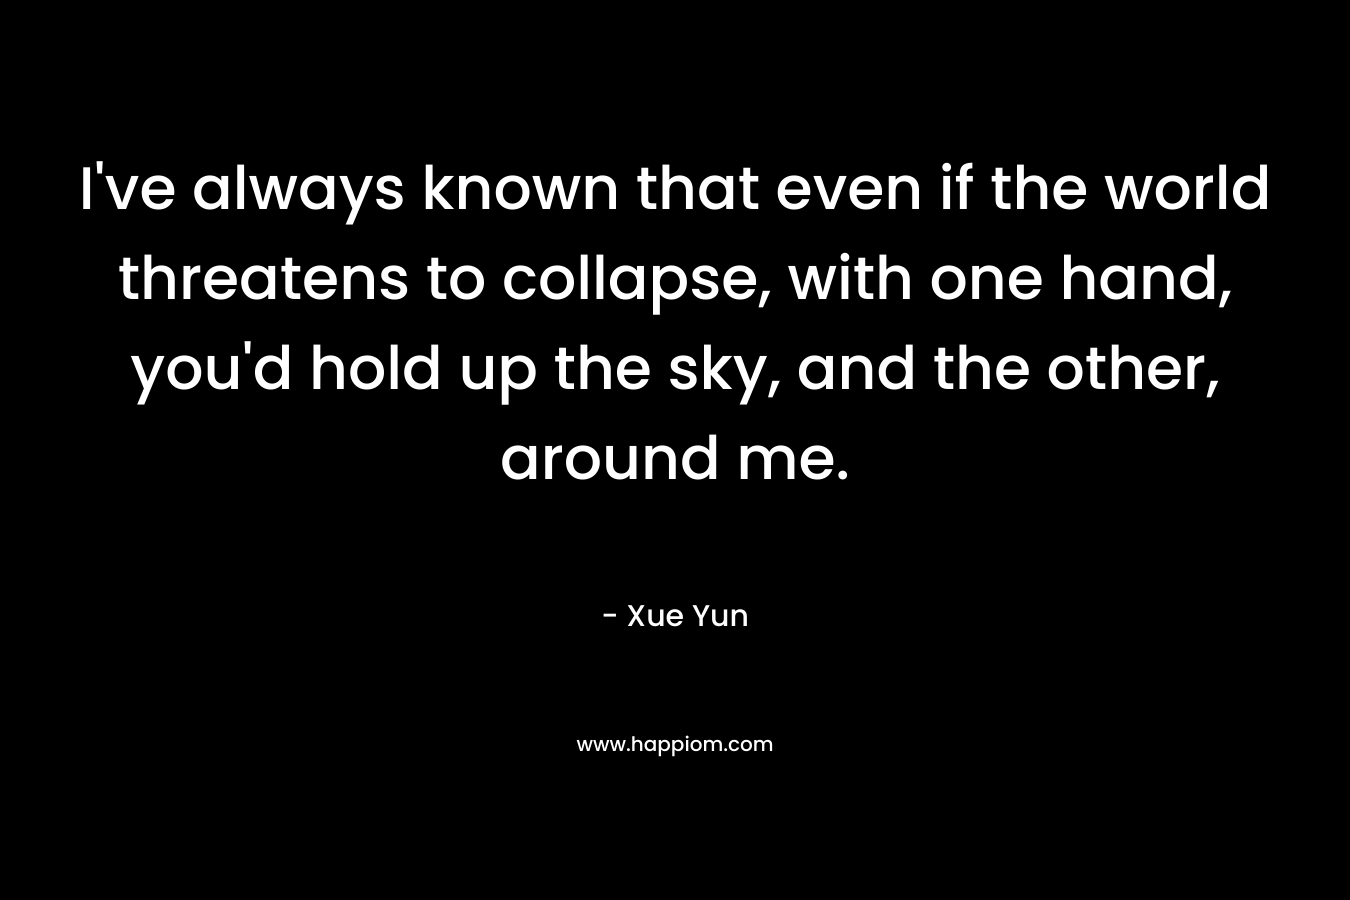 I’ve always known that even if the world threatens to collapse, with one hand, you’d hold up the sky, and the other, around me. – Xue Yun